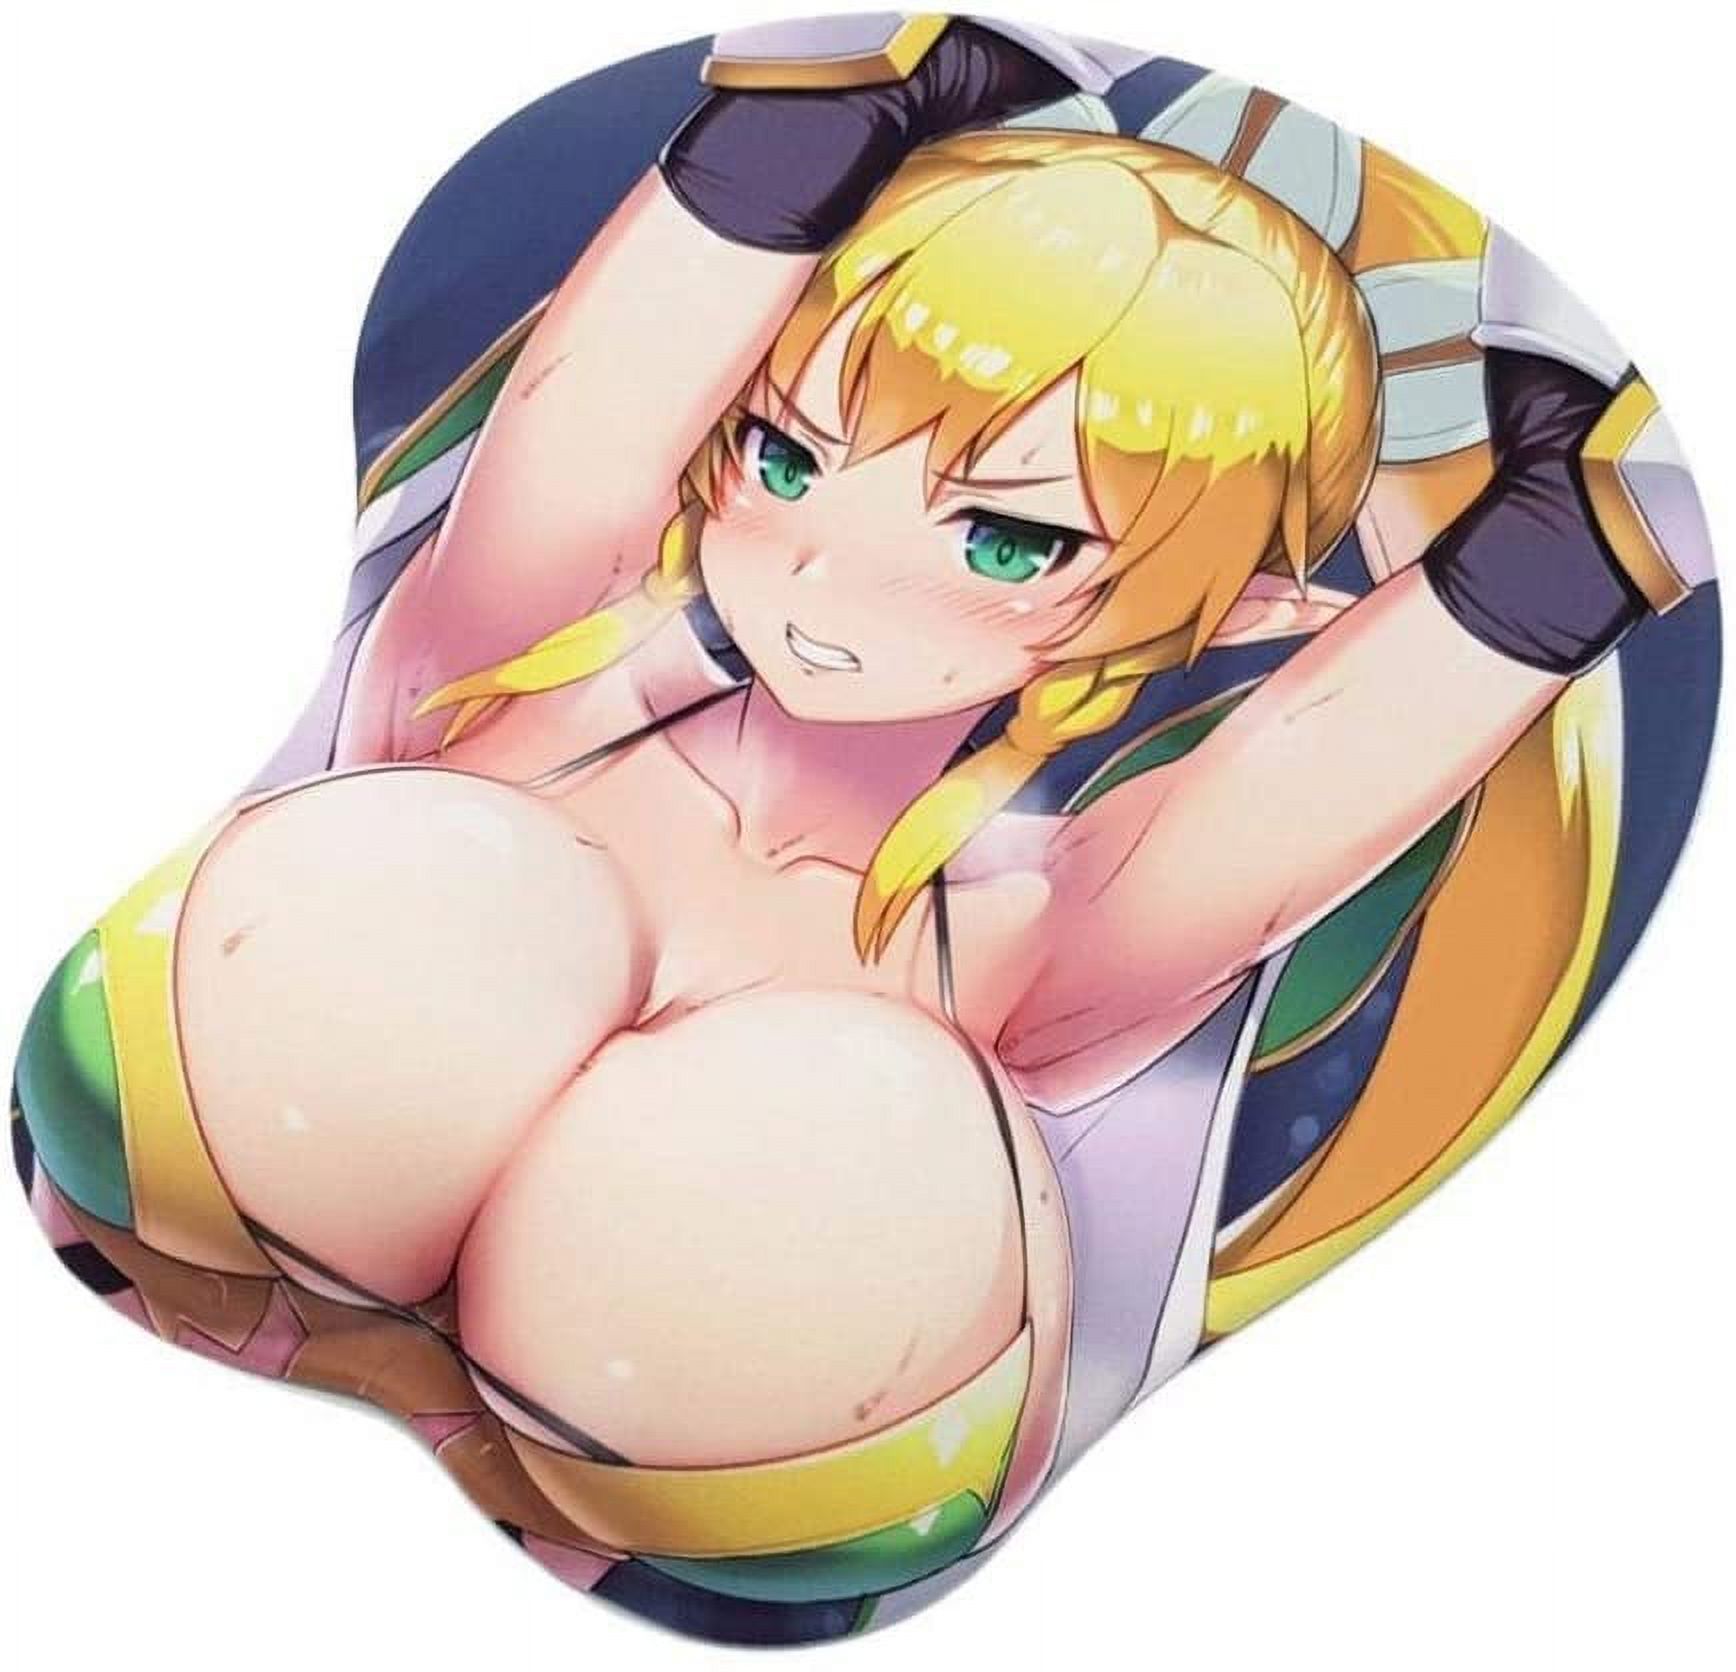 Swords Online Leaf Girl Anime Oppai Soft Ergonomic Mouse Pad w/ 3D Wrist Support - image 4 of 5